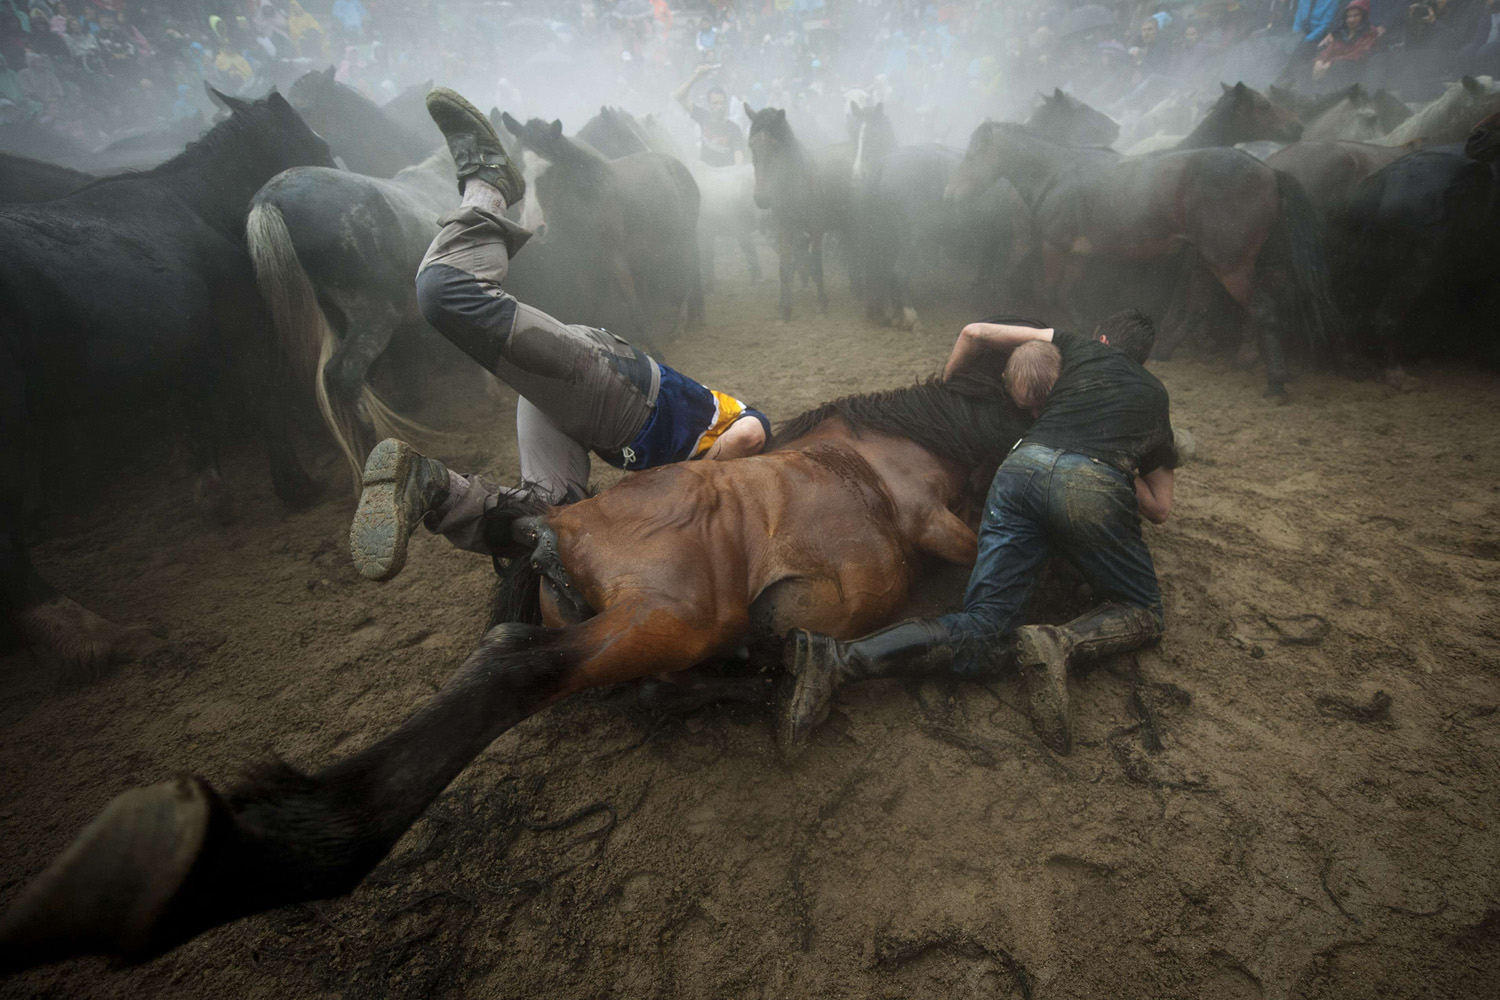 "Aloitadores" (fighters) struggle with a wild horse during the "Rapa Das Bestas" (Shearing of the Beasts) traditional event in Sabucedo, Spain on July 5, 2014.